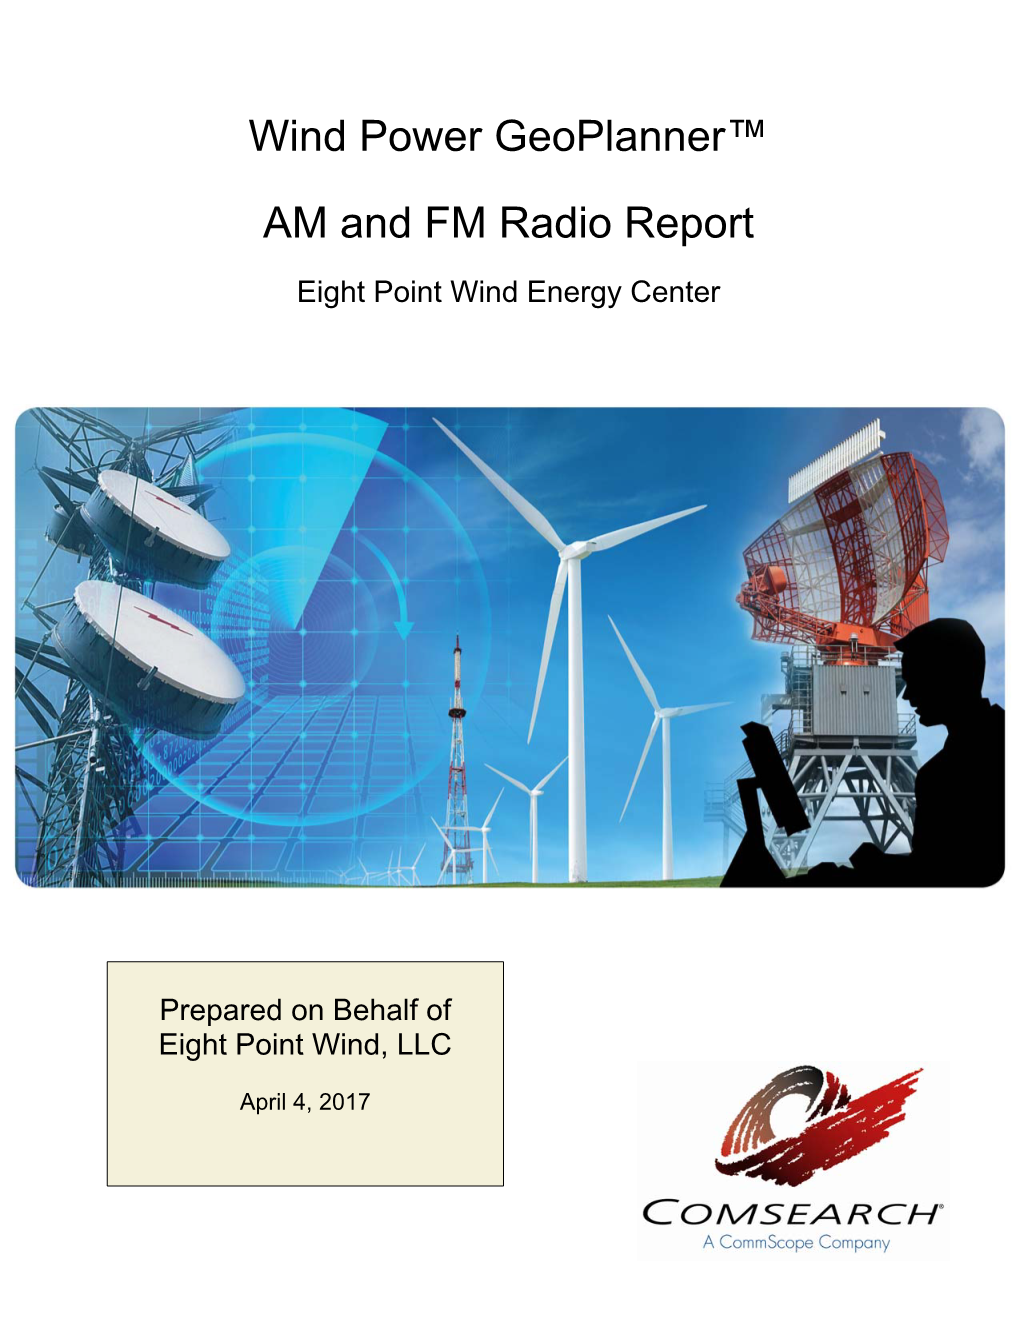 Wind Power Geoplanner™ AM and FM Radio Report Eight Point Wind Energy Center